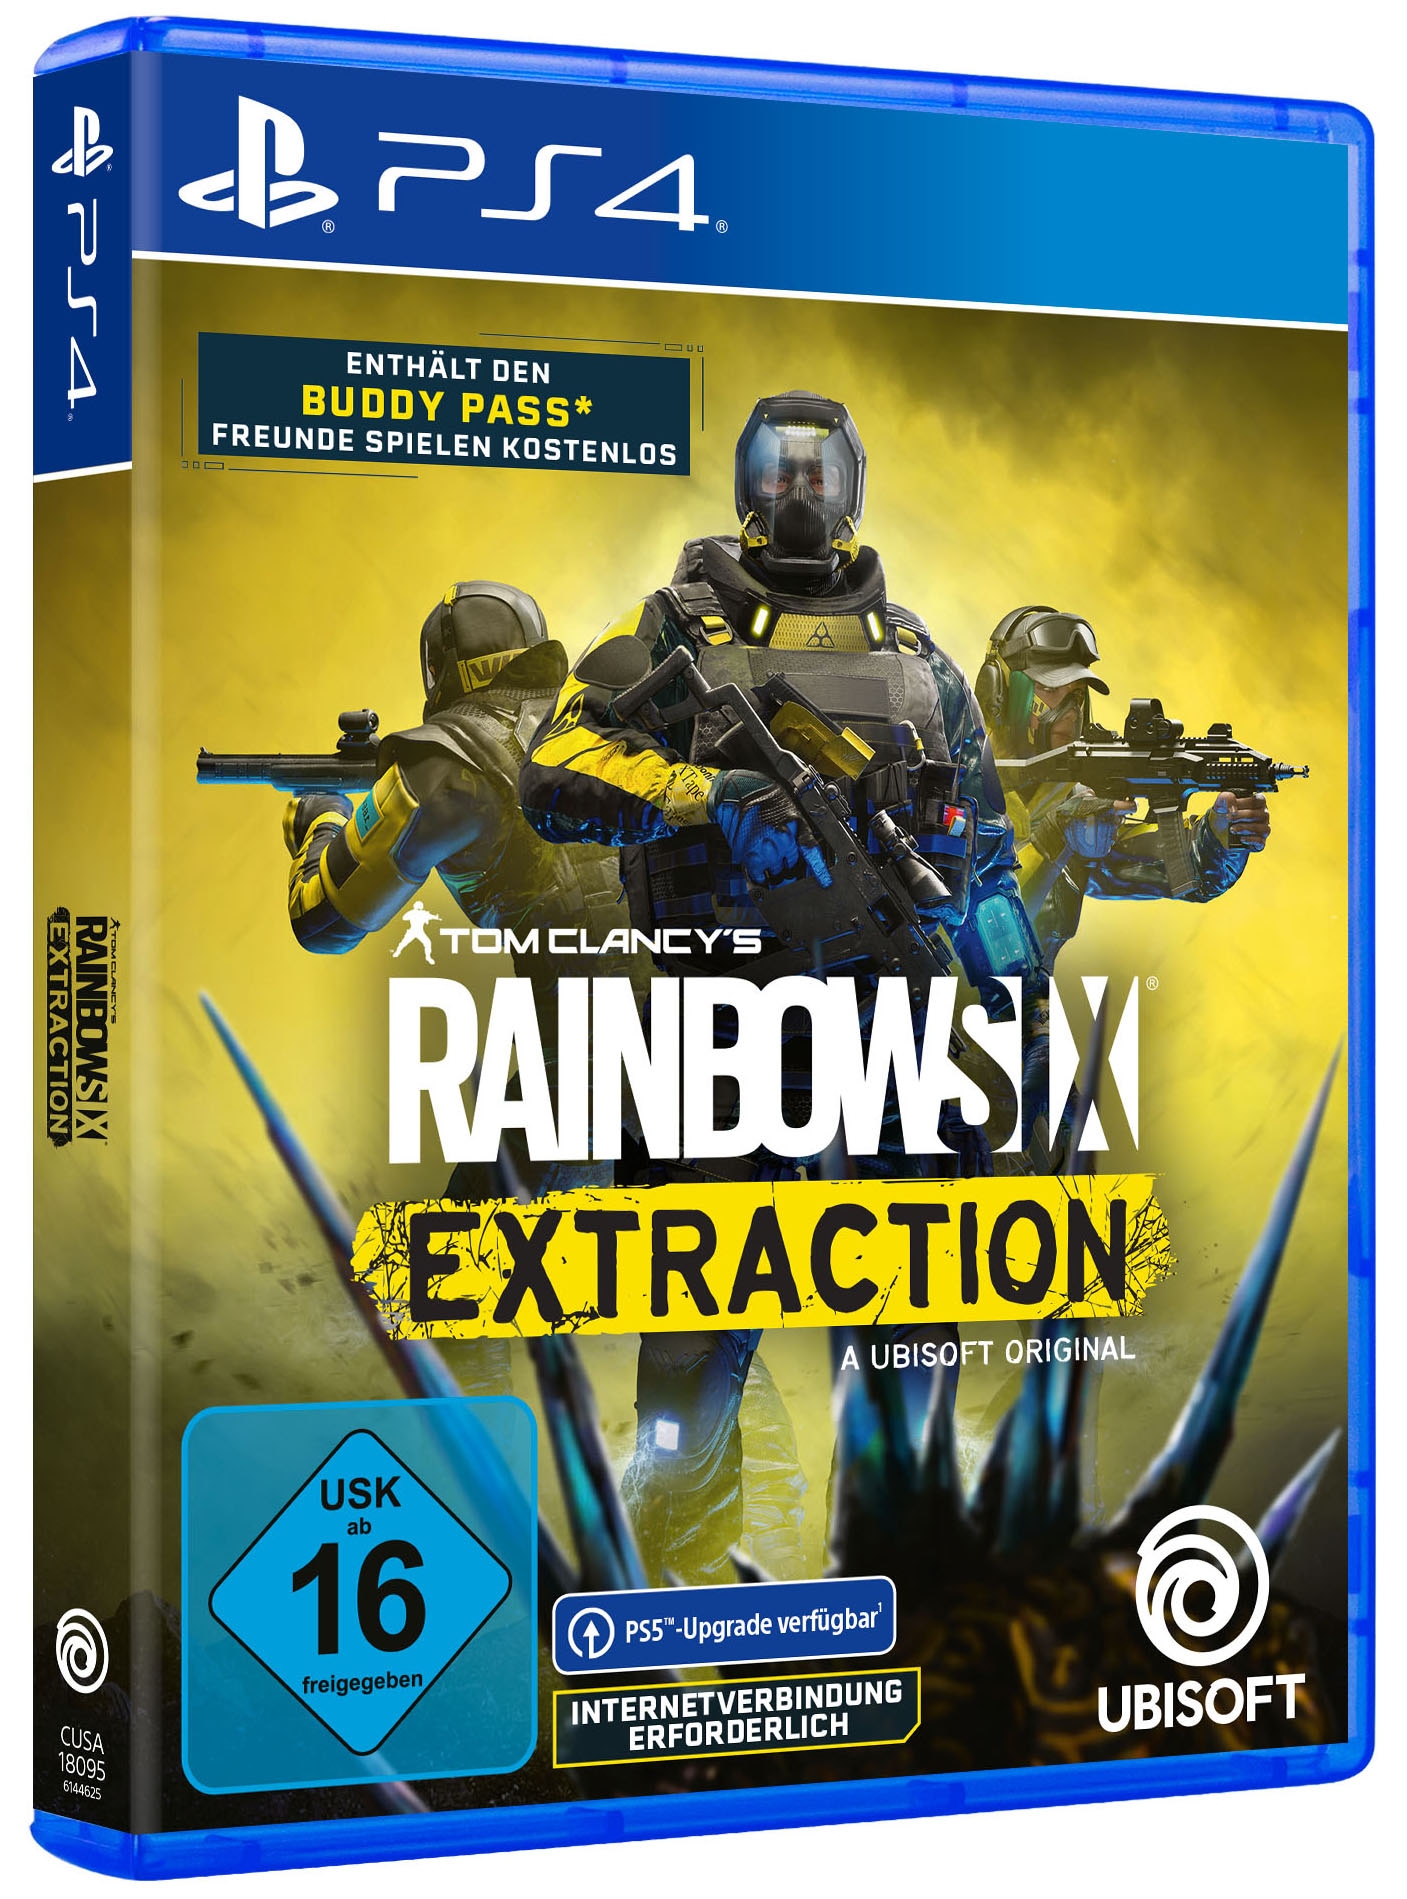 Spielesoftware »Rainbow Six Extraction«, PlayStation 4